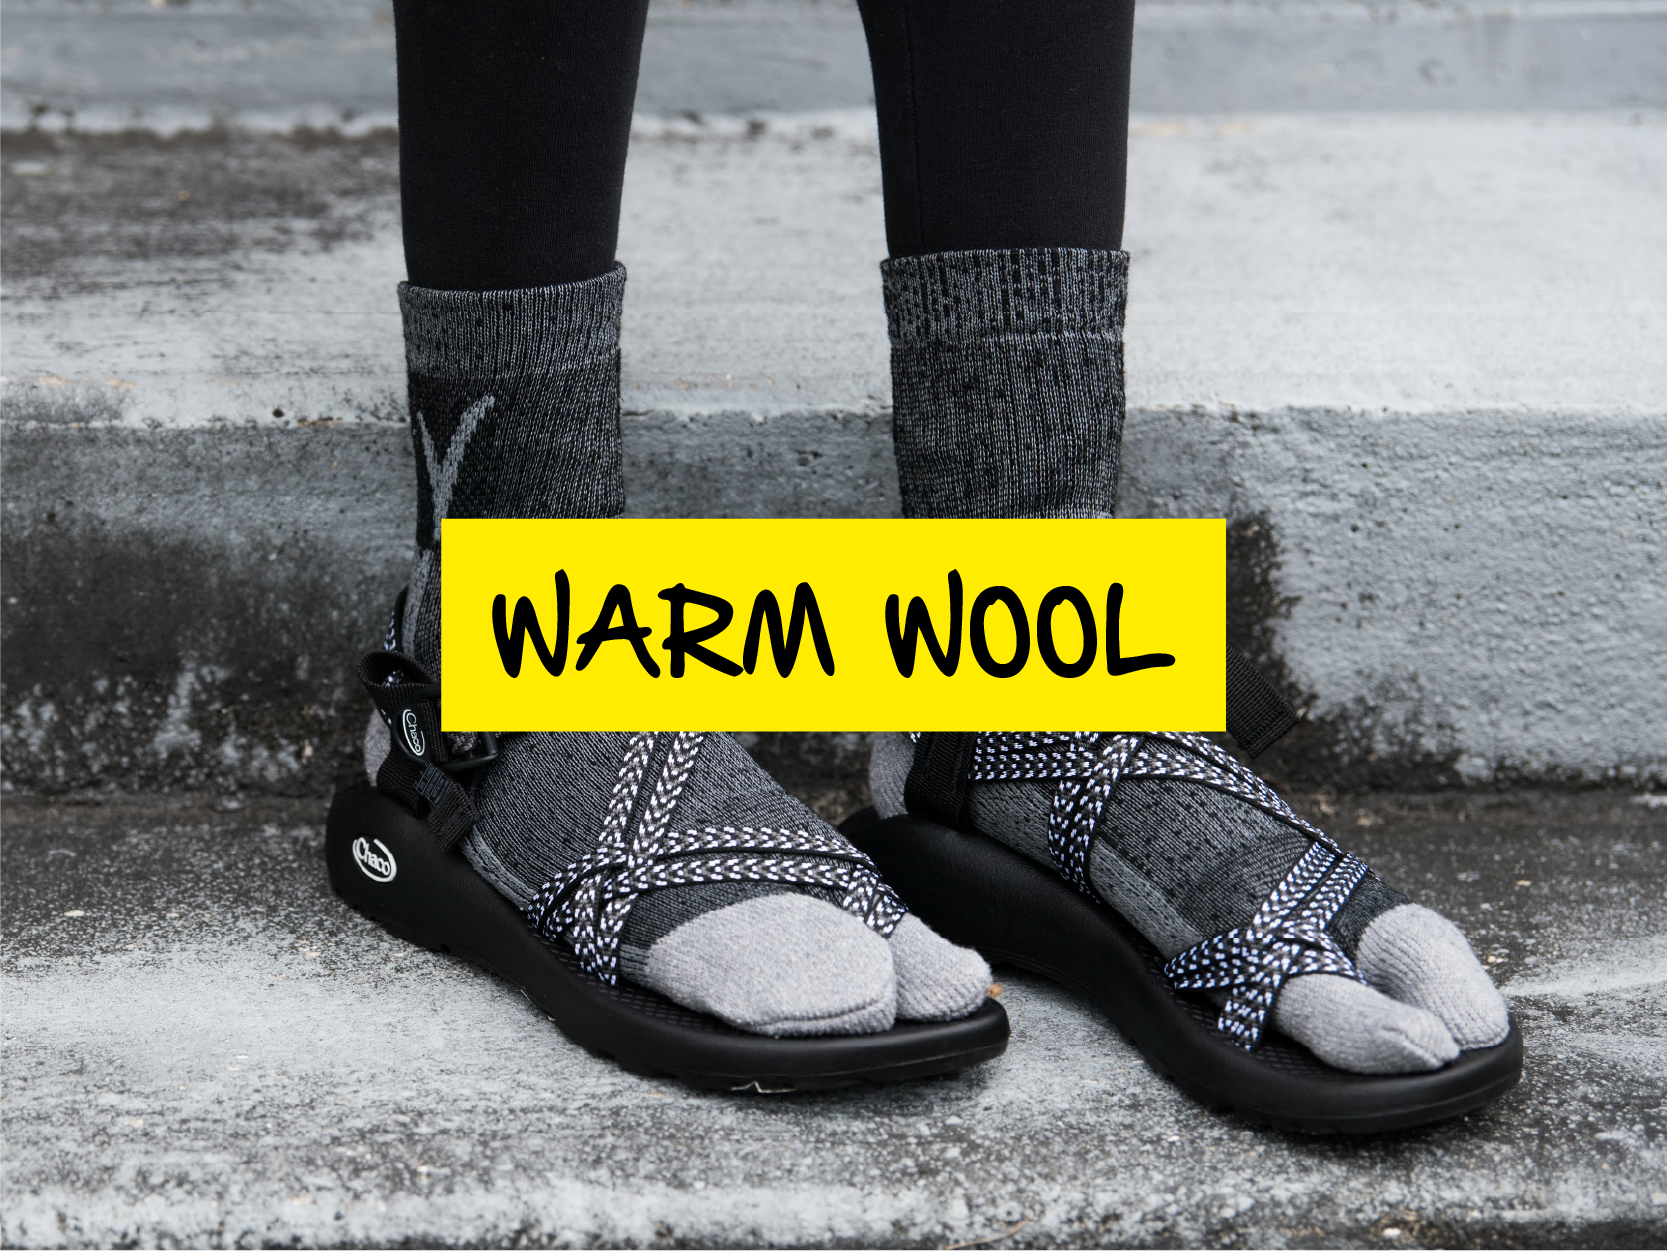 Wool flip-flop socks also known as chaco socks or socks for chacos.  Warm toes hiking or just hanging out.  big toe socks for all occasions.  Thicker socks split toe wool socks for slides teva or tabi toe.  Hiking socks for the adventurer or casual style.